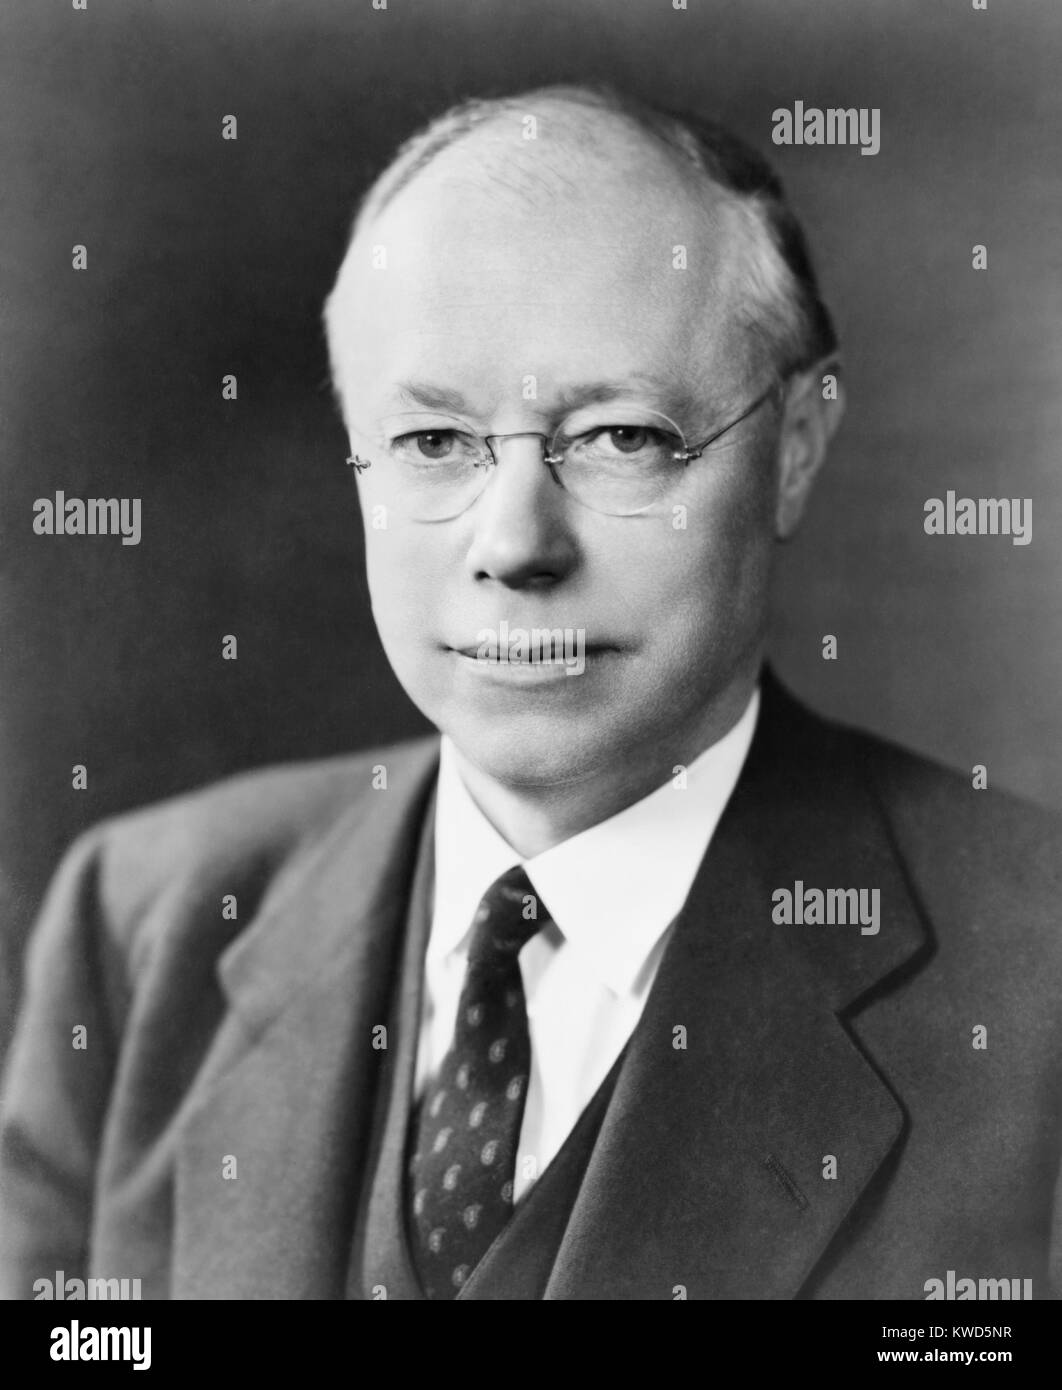 Robert Taft was the son of President Howard Taft. The Ohio senator unsuccessfully sought the Republican Presidential nomination in 1940, 1948, and 1952. (BSLOC 2014 13 35) Stock Photo